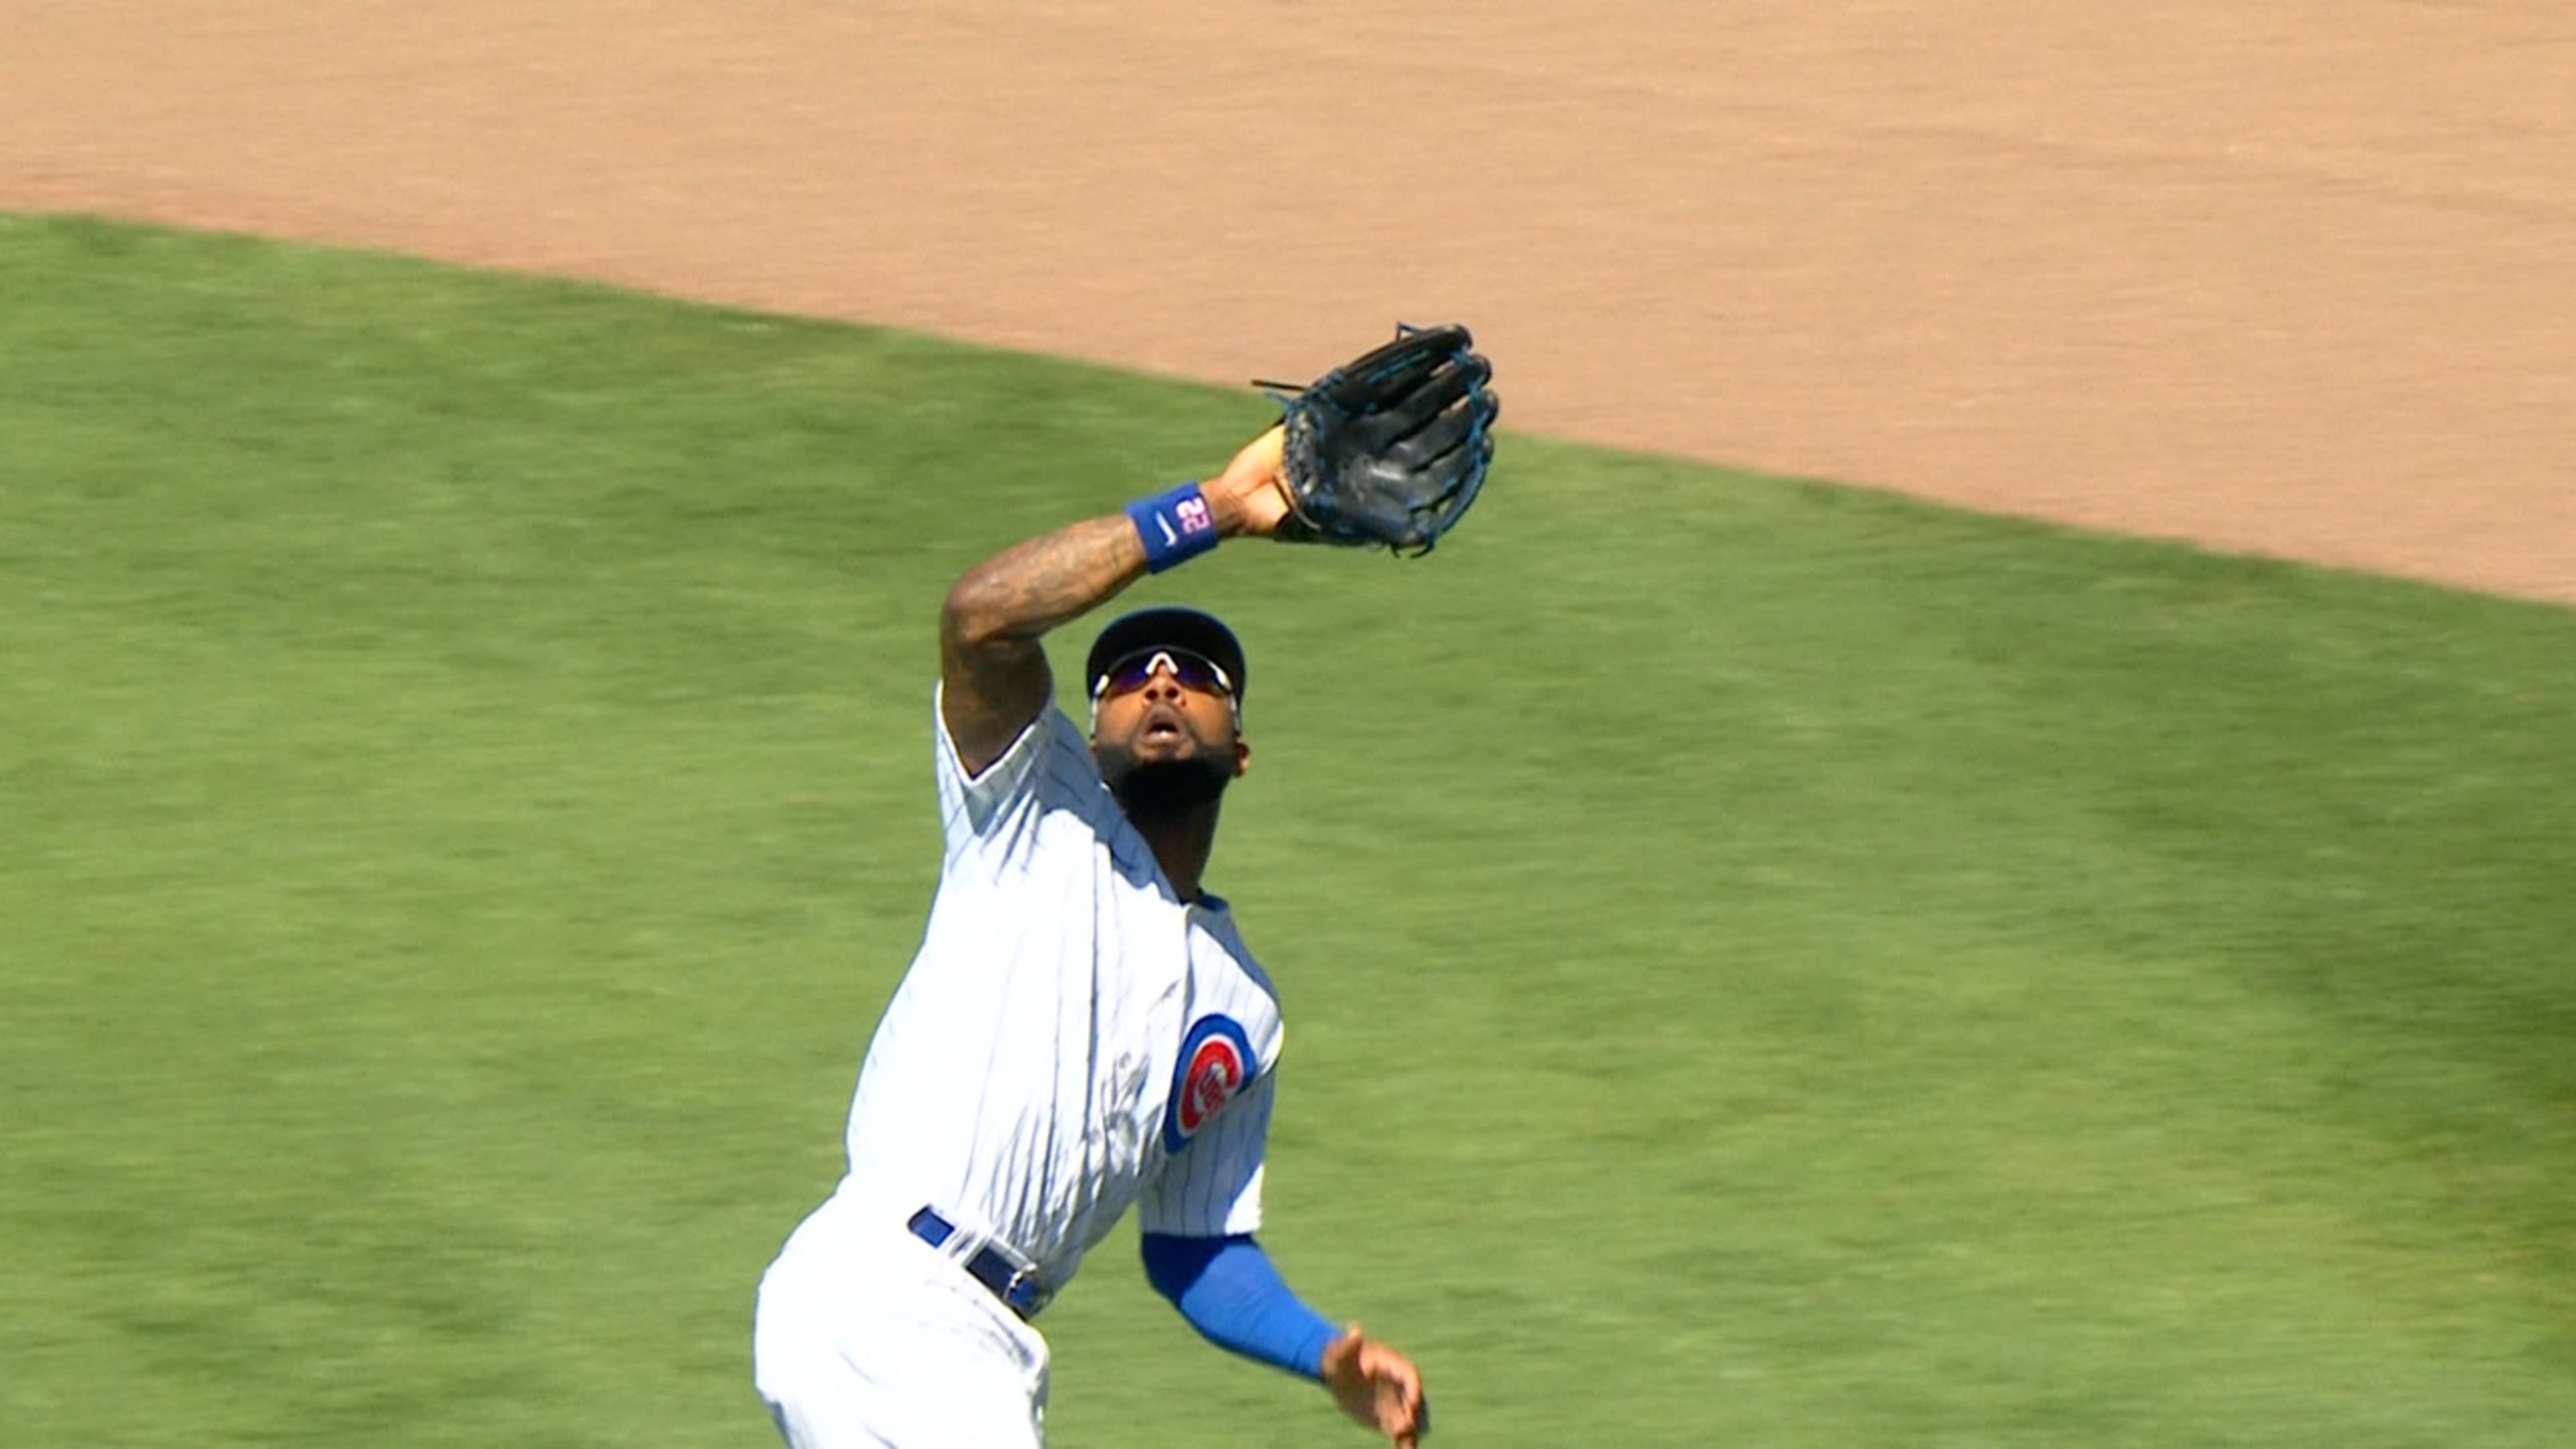 Watch: Cubs Share Touching Video Tribute to World Series Champion Jason  Heyward in Final Season on North Side - Cubs Insider